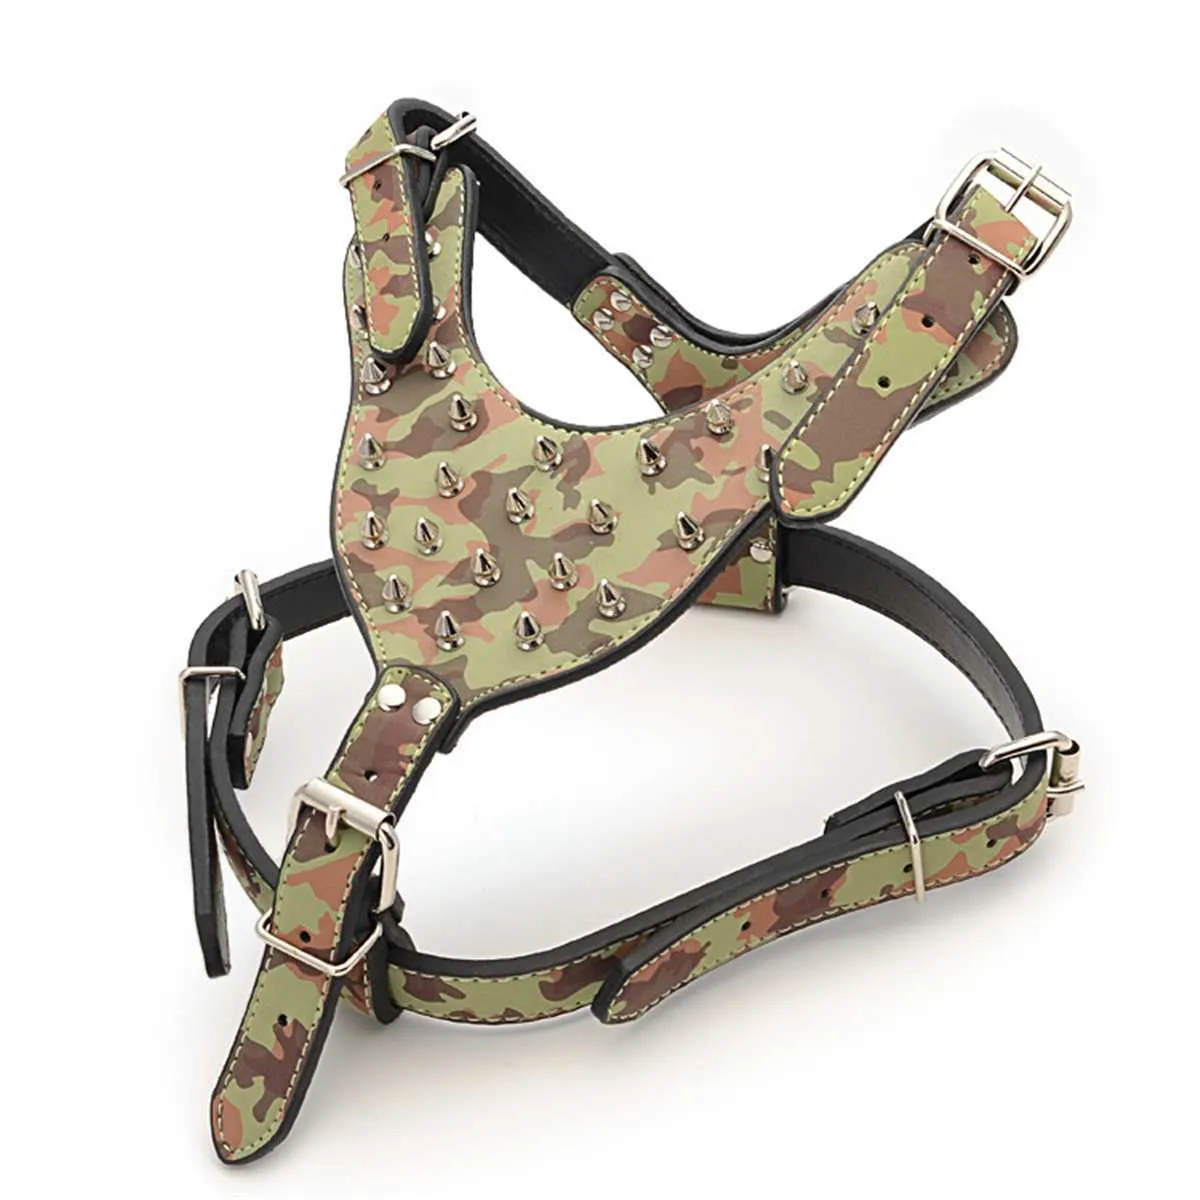 Large Dog Harness and Collar Set Spiked Studded Leather Dog Pet Harness Collar for Pit Bull Mastiff Medium Large Dogs 2010289044914